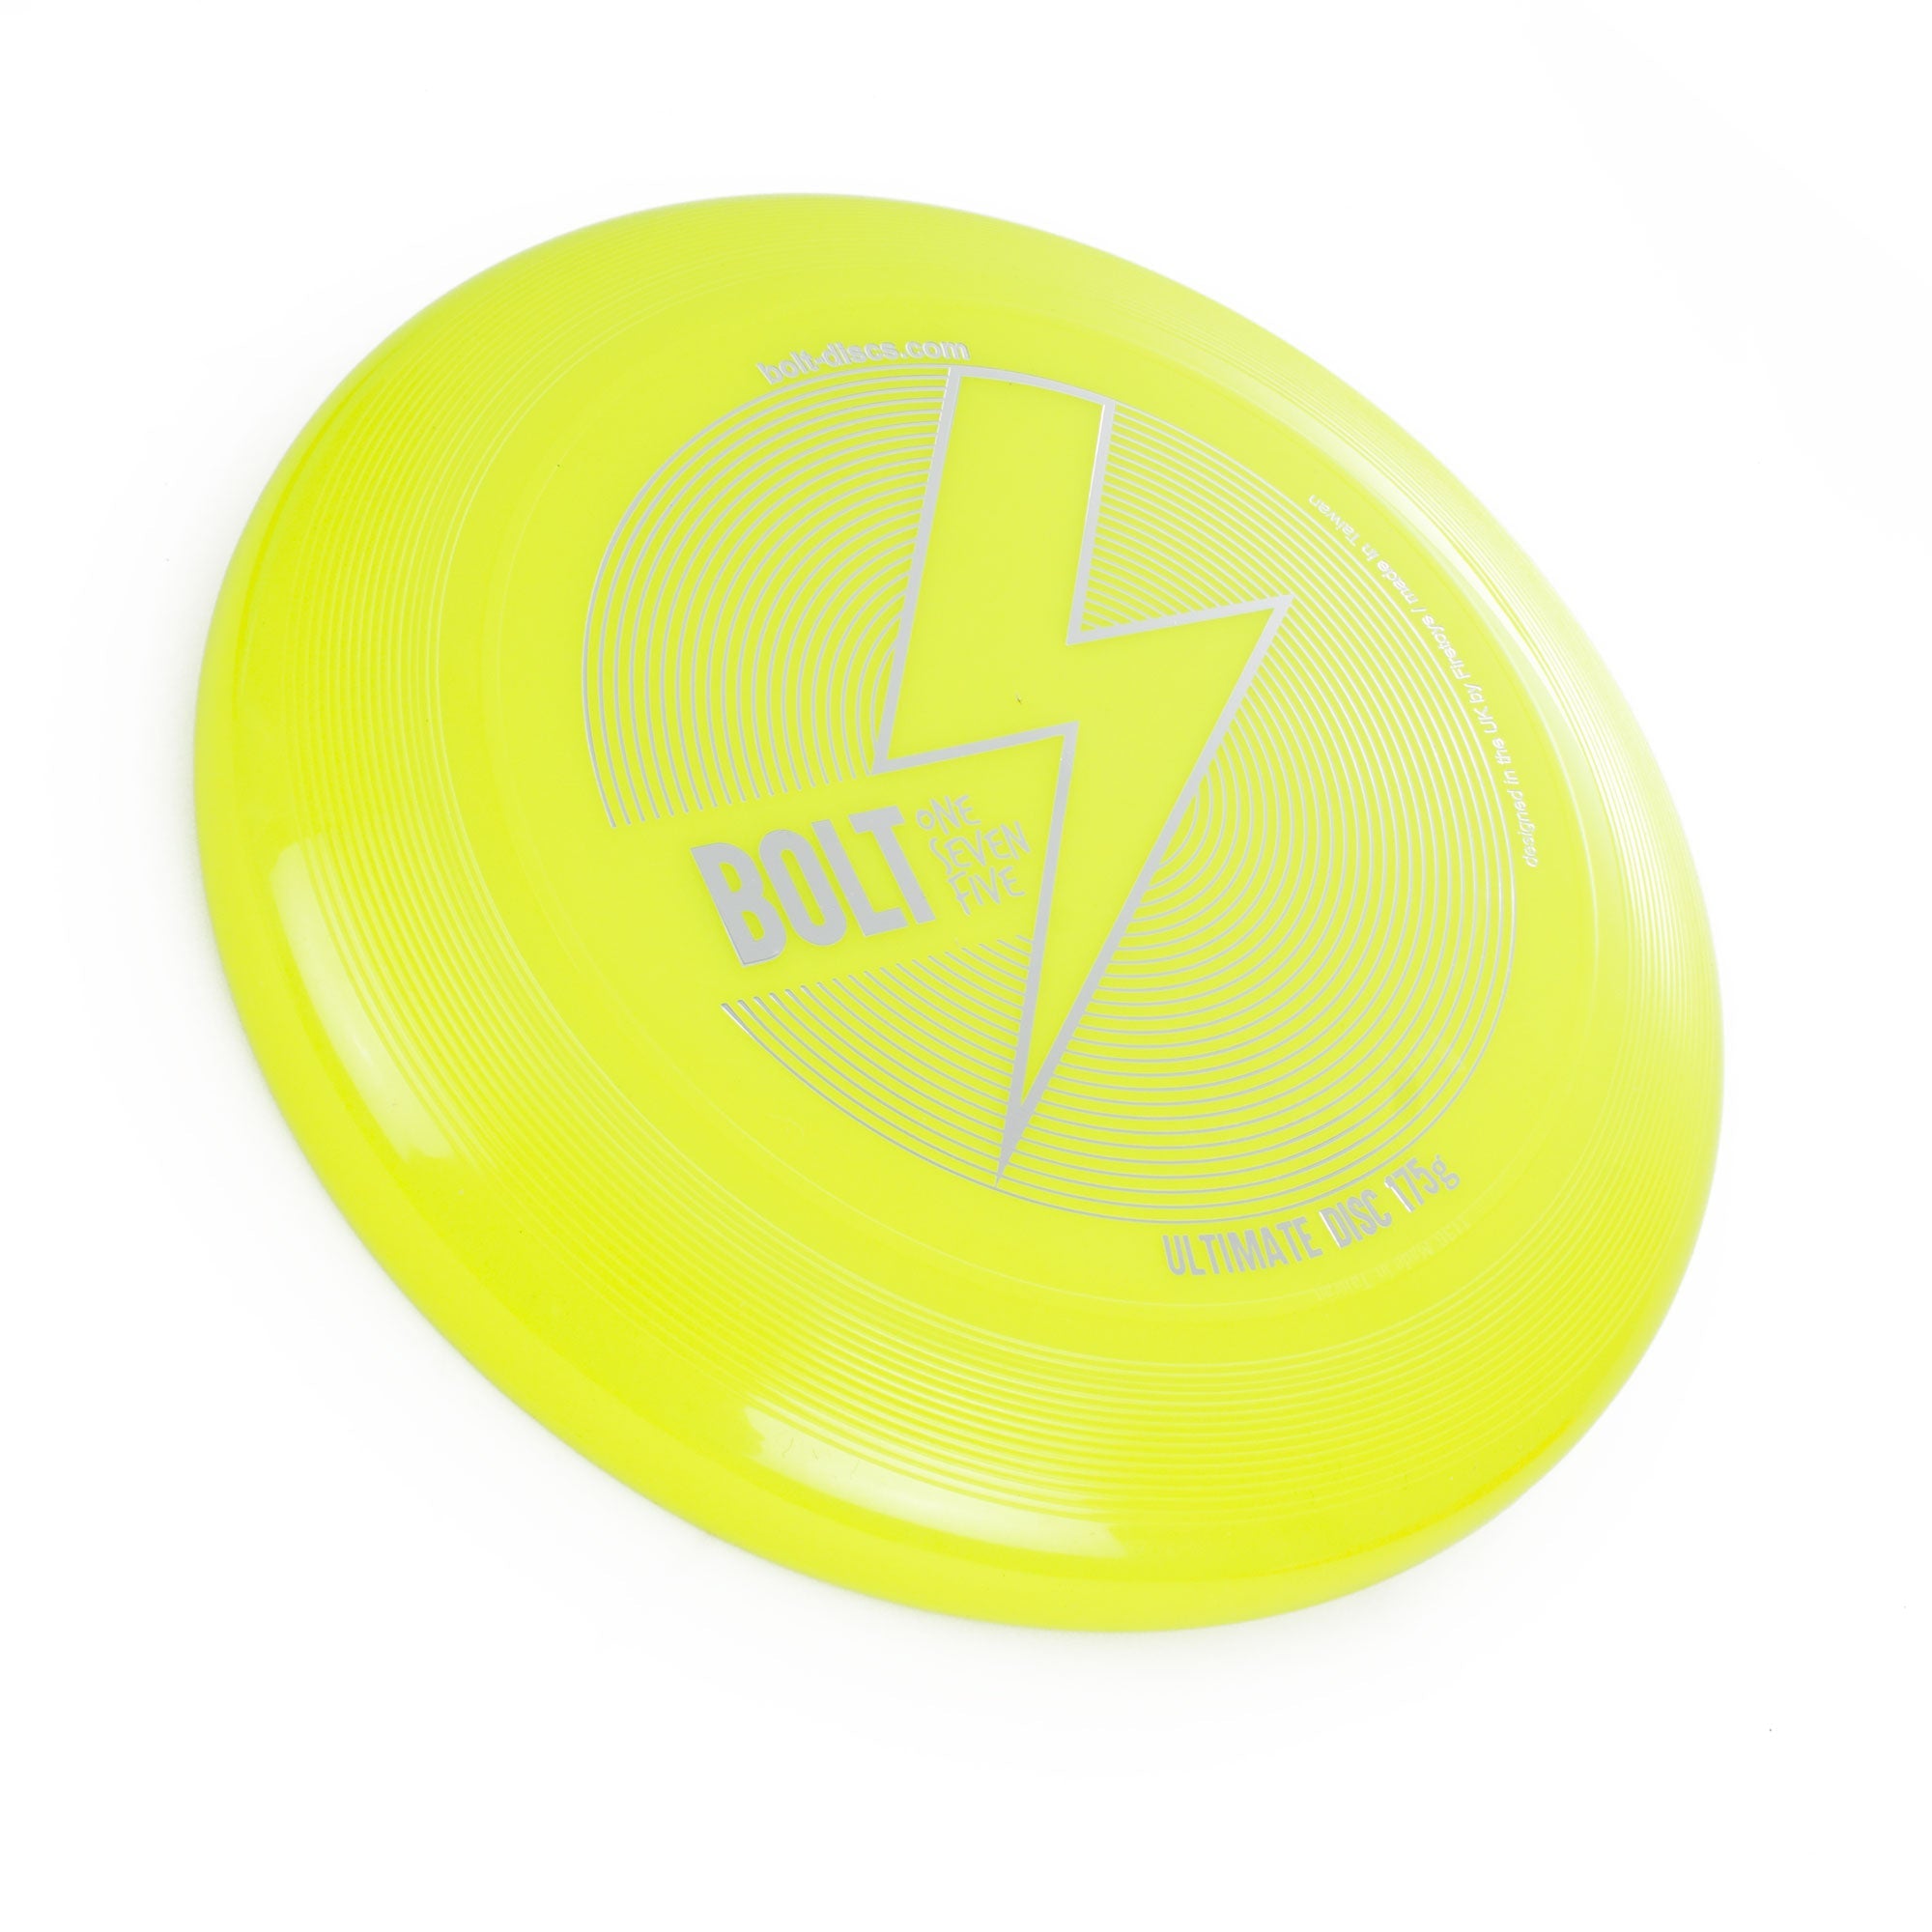 Yellow BOLT frisbee at an angle